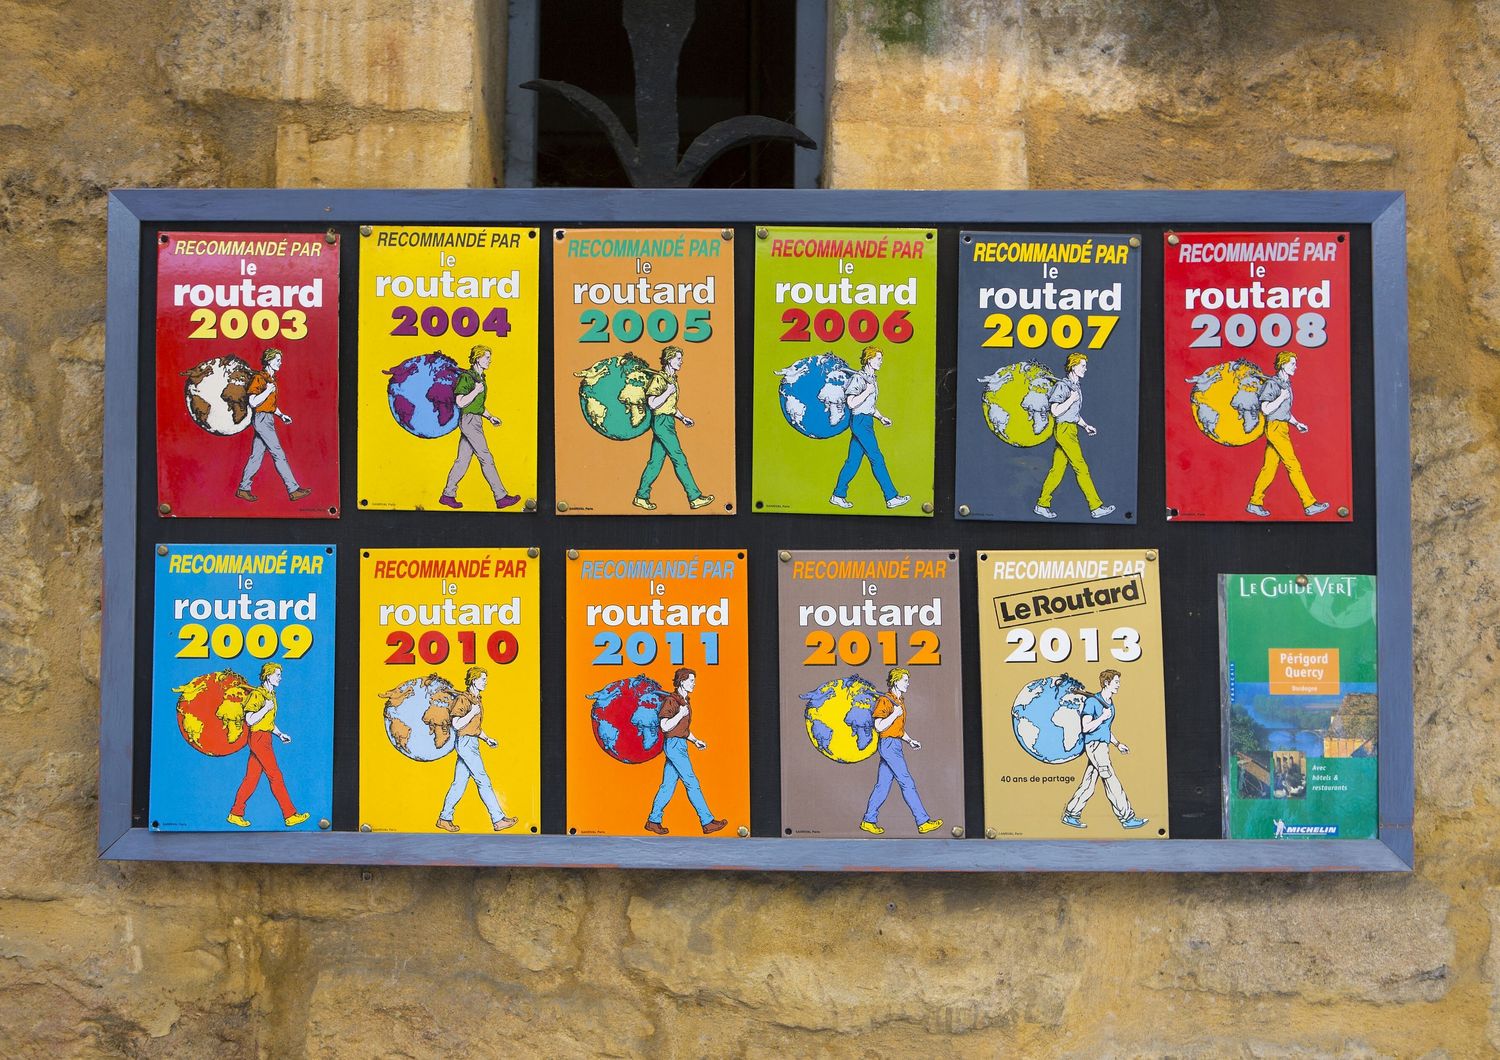 Le Guide du Routard celebrates its 50th anniversary